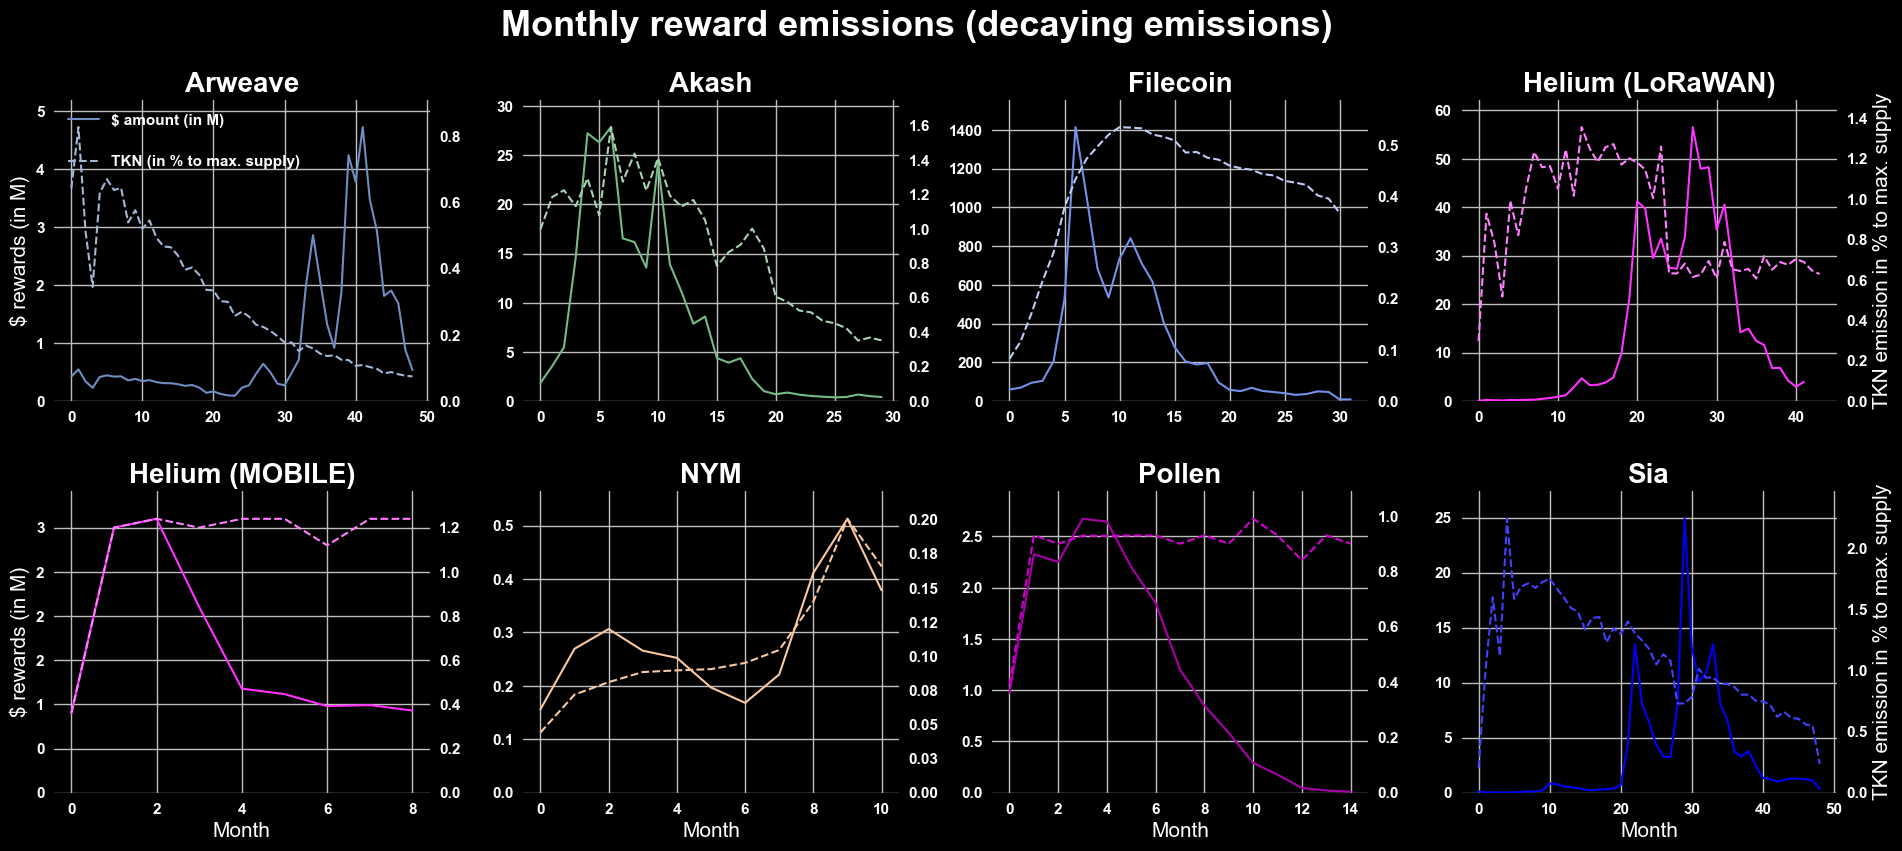 All networks saw their peak dollar-emissions during the second half of 2021, which explains why dashed and solid lines are so different, e.g. Arweave’s token rewards in $-terms peaked after month 40 when the monthly token rewards already decreased below 0.1% of the total AR supply (upper left chart). It is interesting to observe that those monthly token rewards in dollar-terms peaked in the tens if not hundreds of millions of dollars. More recently launched networks like Helium MOBILE, Pollen and NYM have not experienced such positive market tailwinds yet. NYM also has lower monthly token emissions in general⁹.